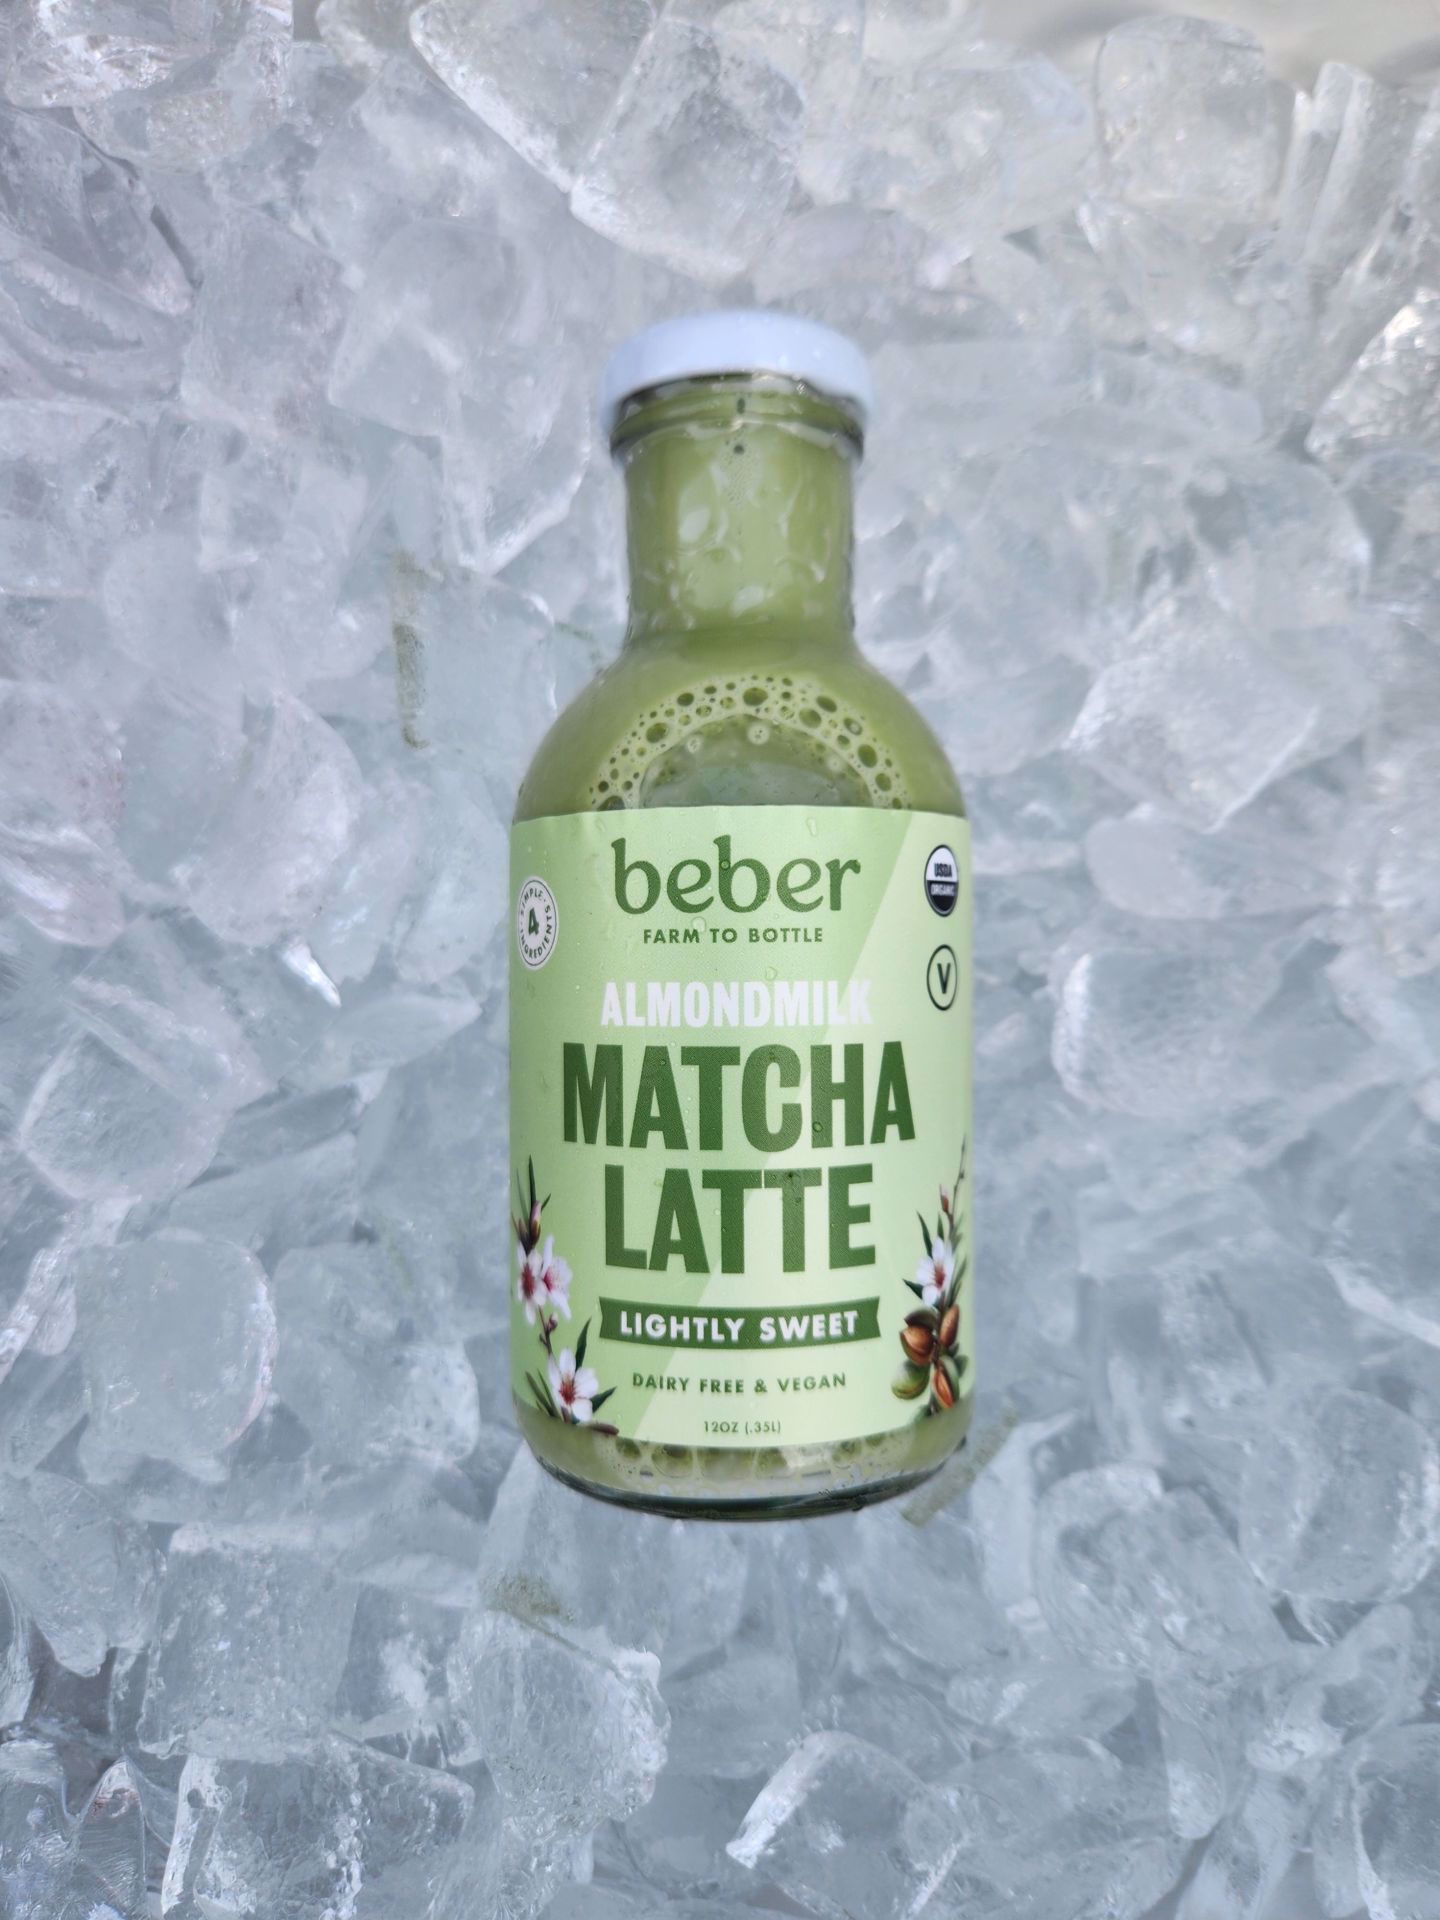 Shaker & Spoon Matcha Cocktail Syrup, 16oz Matcha Green Tea Powder Flavored  Syrups for Drinks, Coffee Syrup, Matcha Tea, Matcha Lattes, Cocktail